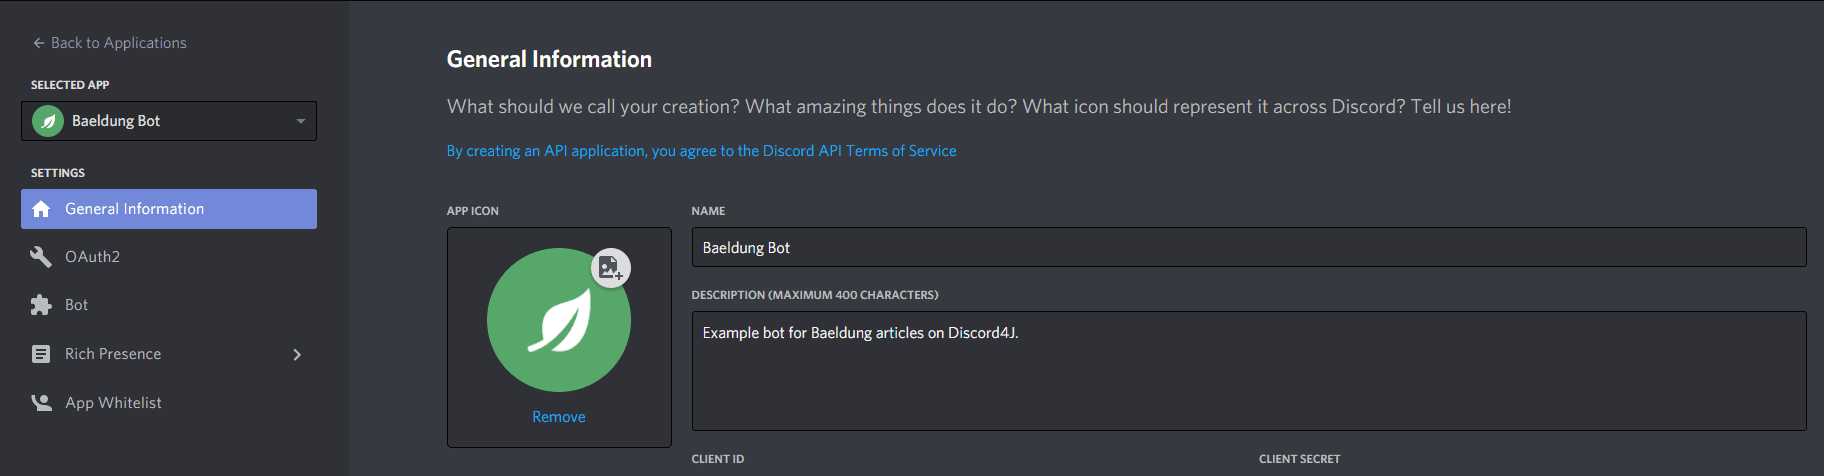 Creating a Discord Application